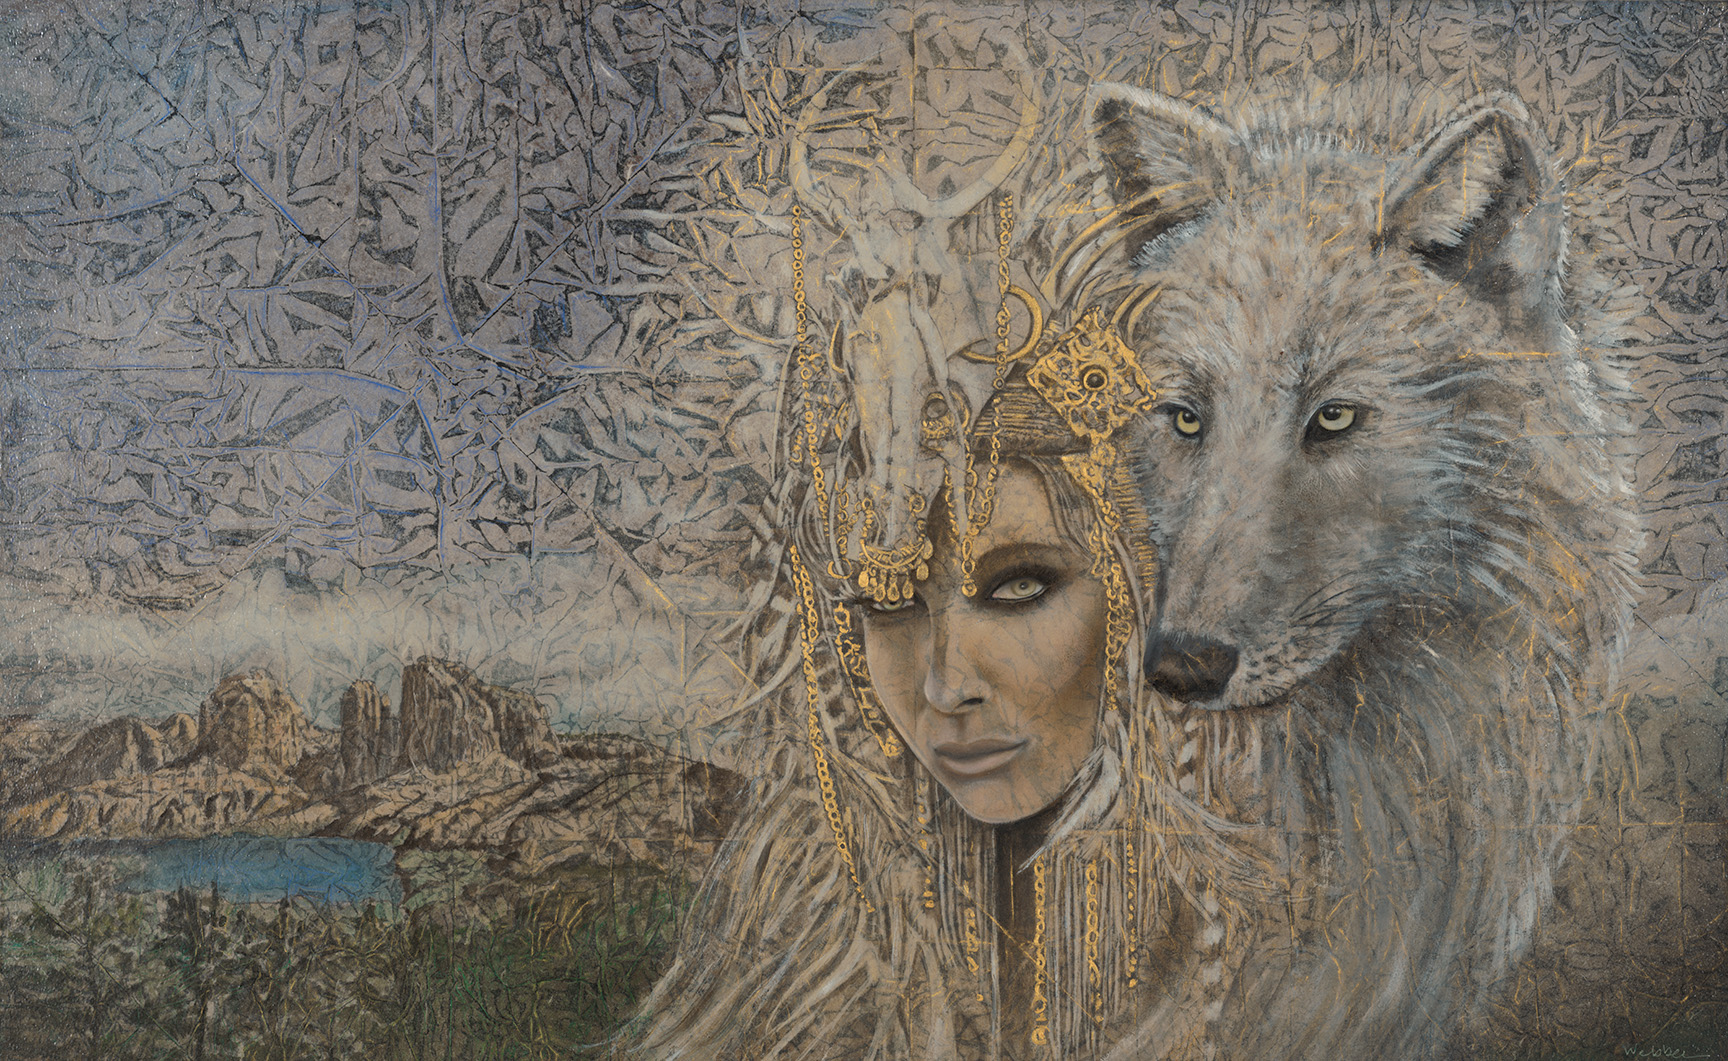 White Wolf_Evolutionary Art_Kimberly-Webber_Contemporary Symbolist Paintings_Magical Realism_Transcendental Art_Archetypal Visionary Artist_Taos New Mexico